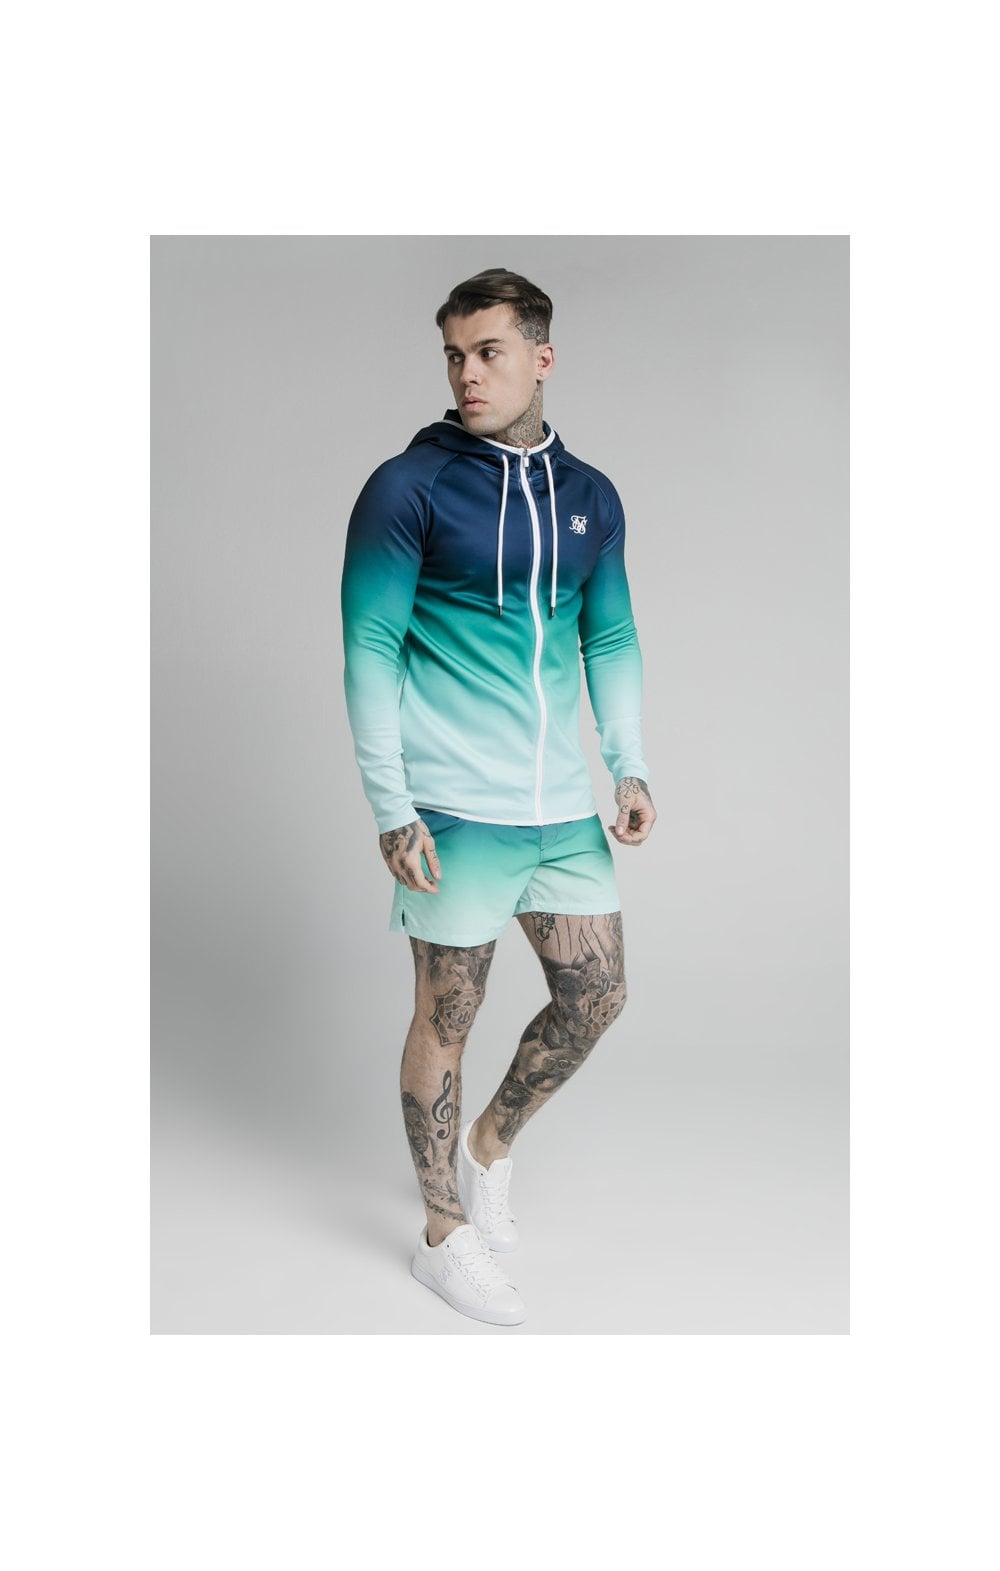 Load image into Gallery viewer, SikSilk Inset Fade Zip Through Hoodie - Navy Pacific Fade (2)